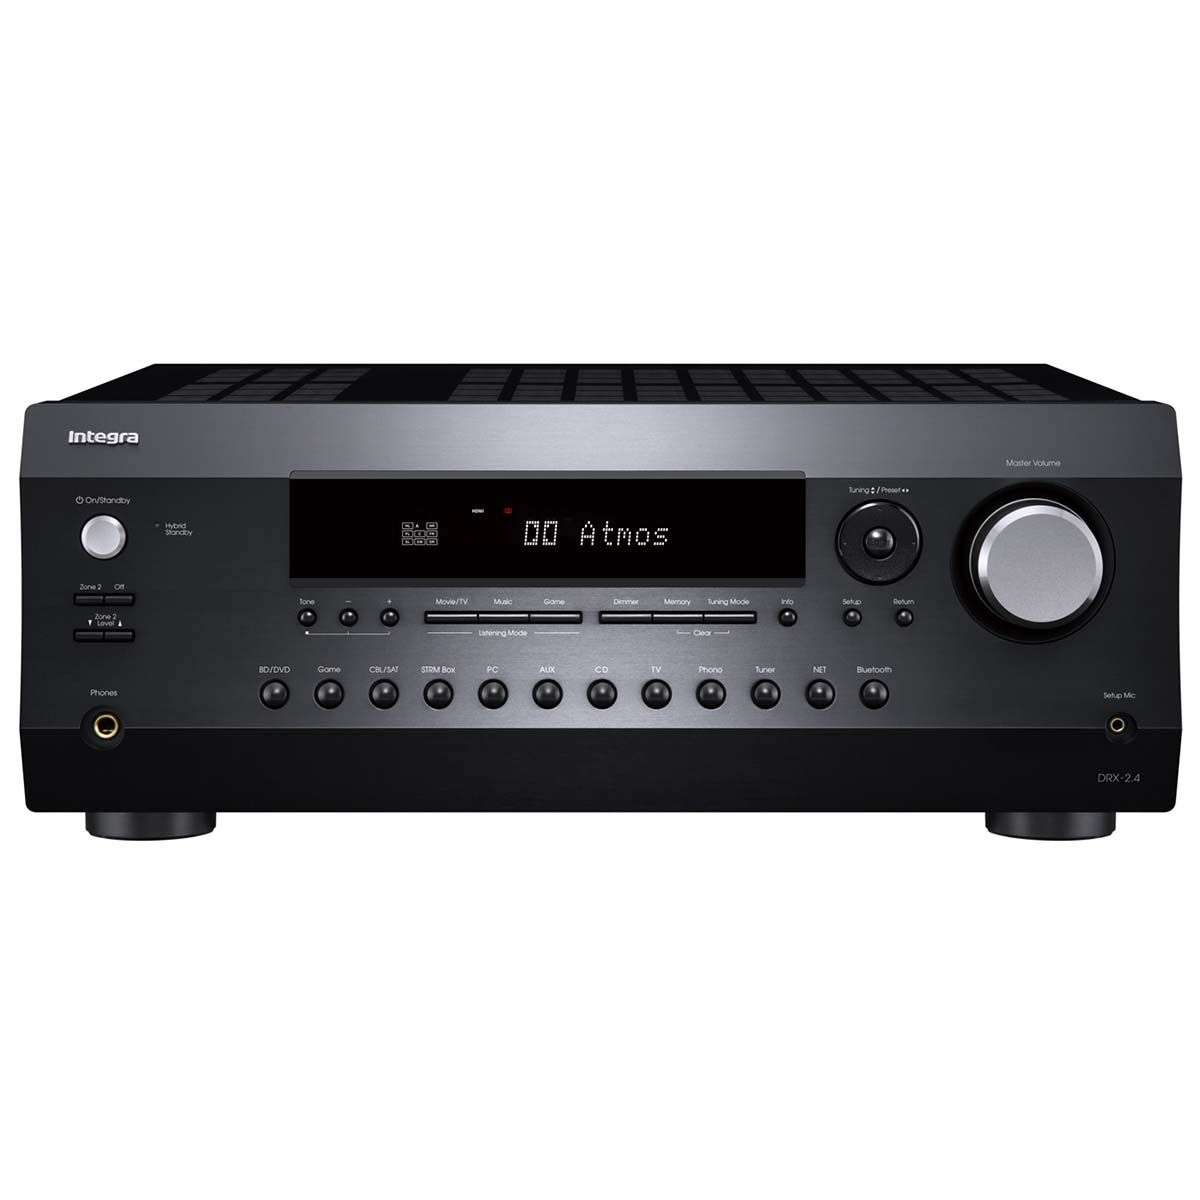 Integra DRX 2.4 Home Theater Receiver, front view